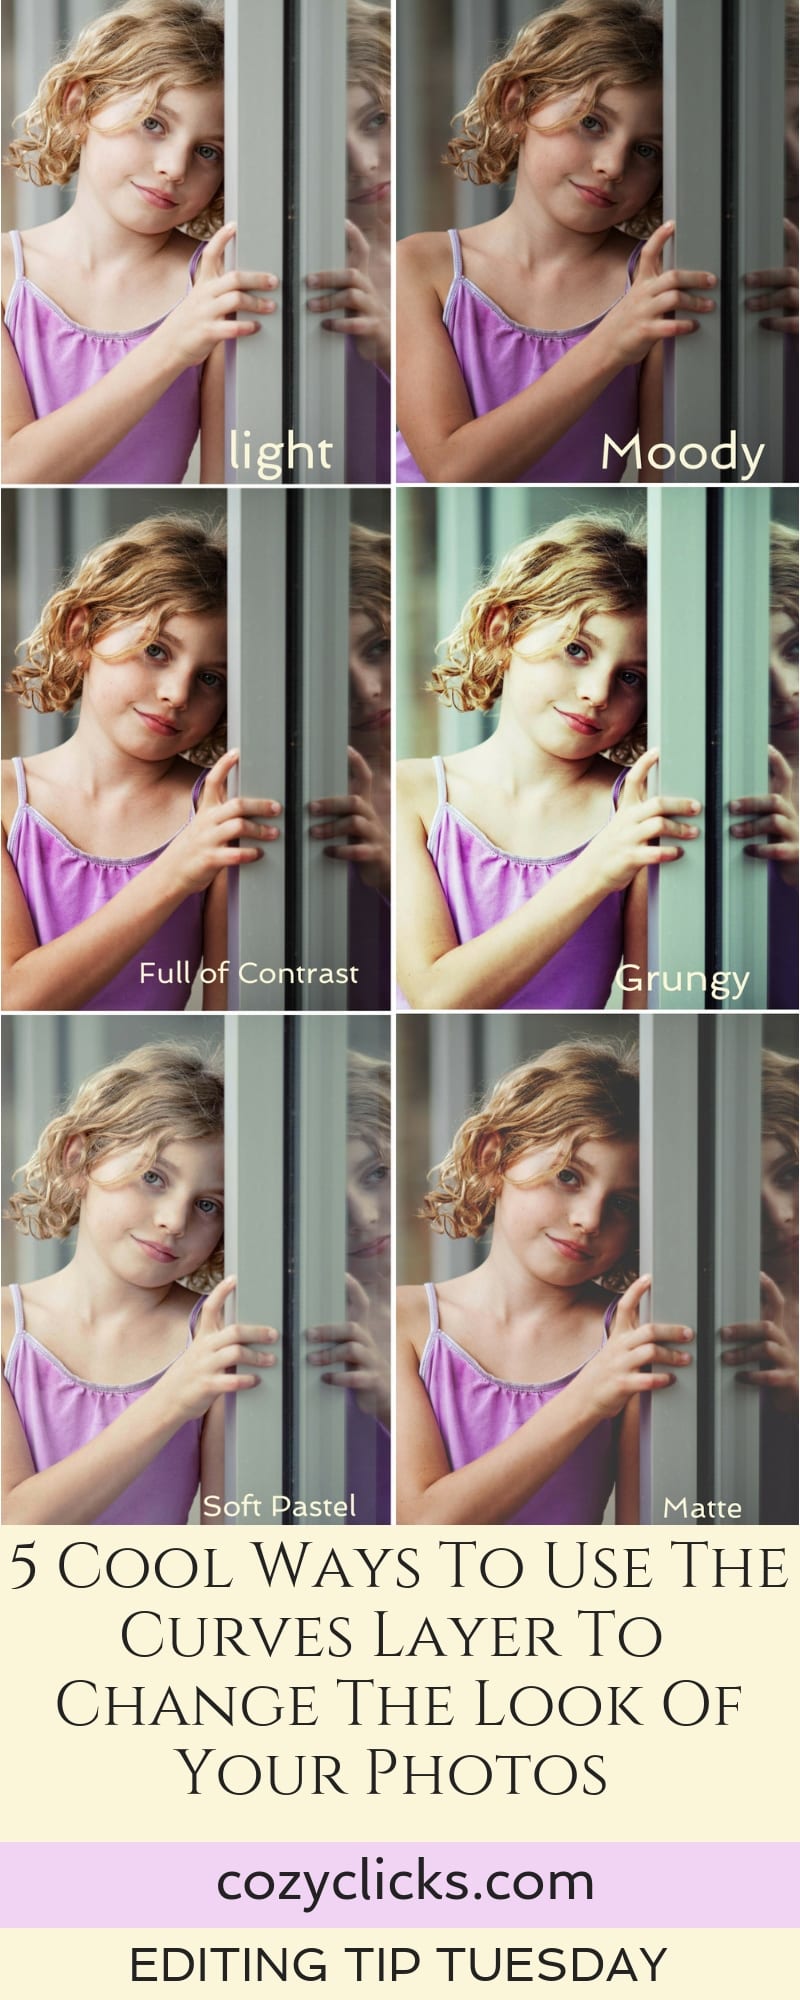 5 Cool Ways To Use The Curves Layer To Completely Change The Look Of Your Photos In Photoshop